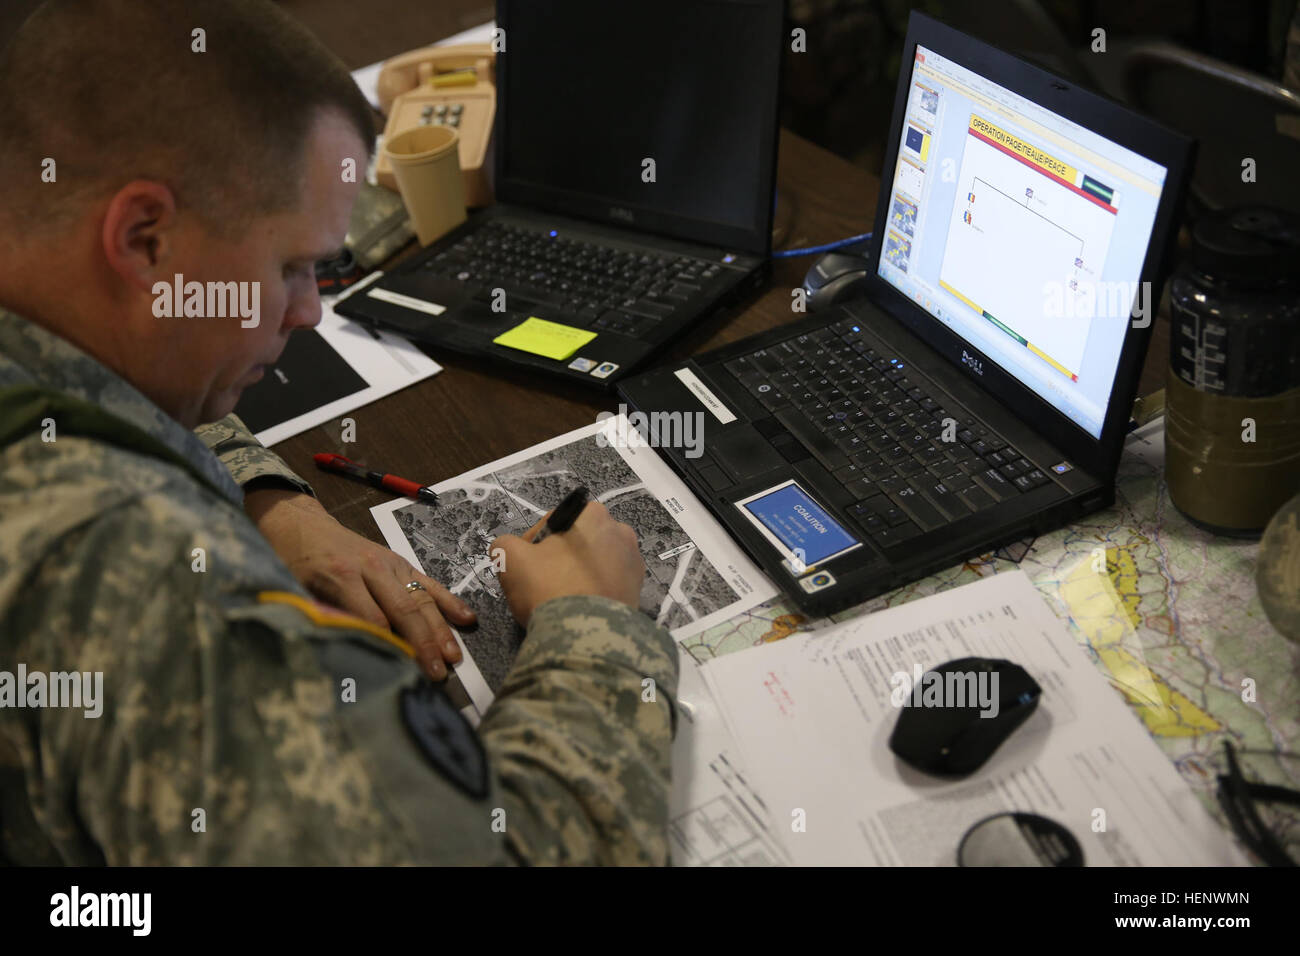 A U.S. Soldier with Alpha Troop, 1st Squadron (Airborne), 40th Cavalry Regiment plots points on a map while conducting tactical operations center operations during the Kosovo Force (KFOR) 19 Mission Rehearsal Exercise (MRE) Oct. 7, 2014, at the Joint Multinational Readiness Center in Hohenfels, Germany. The KFOR 19 MRE was designed to prepare the U.S. Army's 4th Infantry Brigade Combat Team (Airborne), 25th Infantry Division and multinational forces for operations in support of NATO in Kosovo. (U.S. Army photo by Spc. Brian Chaney/Released) KFOR 19 MRE 141007-A-EM978-005 Stock Photo